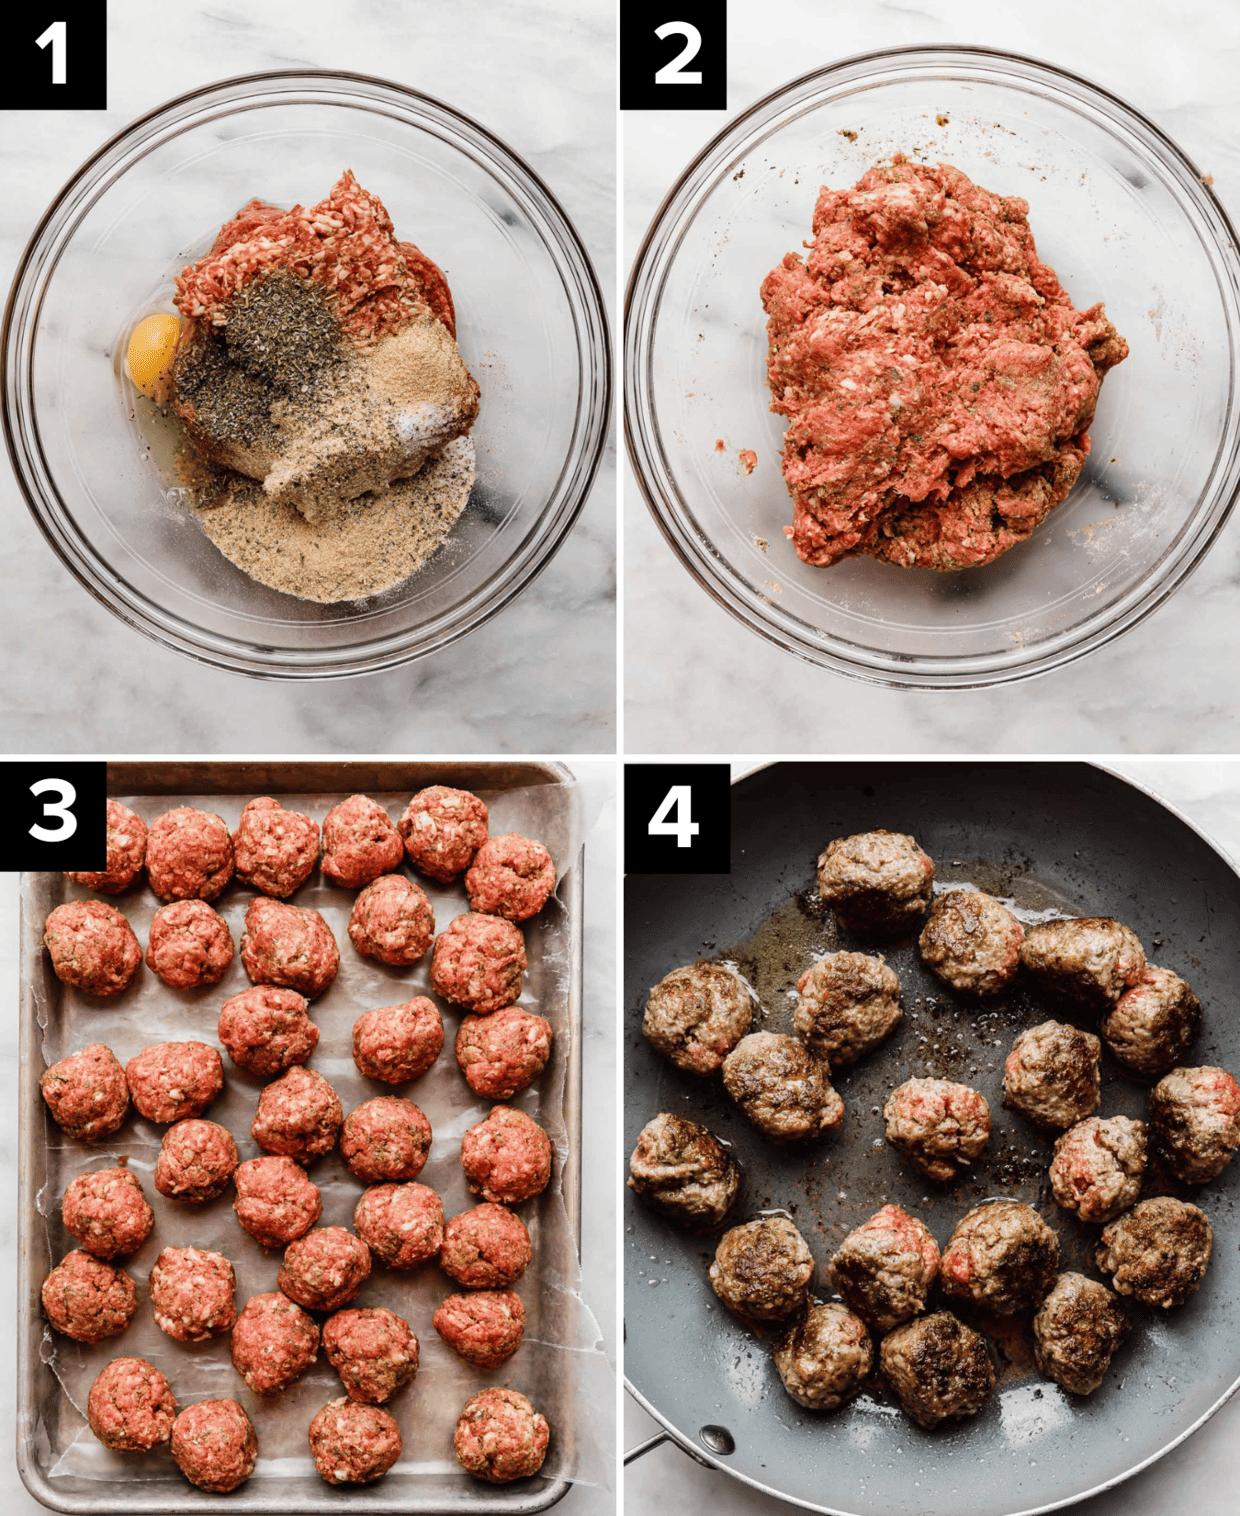 Four photos showing the making of Italian meatballs in a glass bowl, then seasonings added, then rolled into meatballs, and then the meatballs in a skillet being browned.